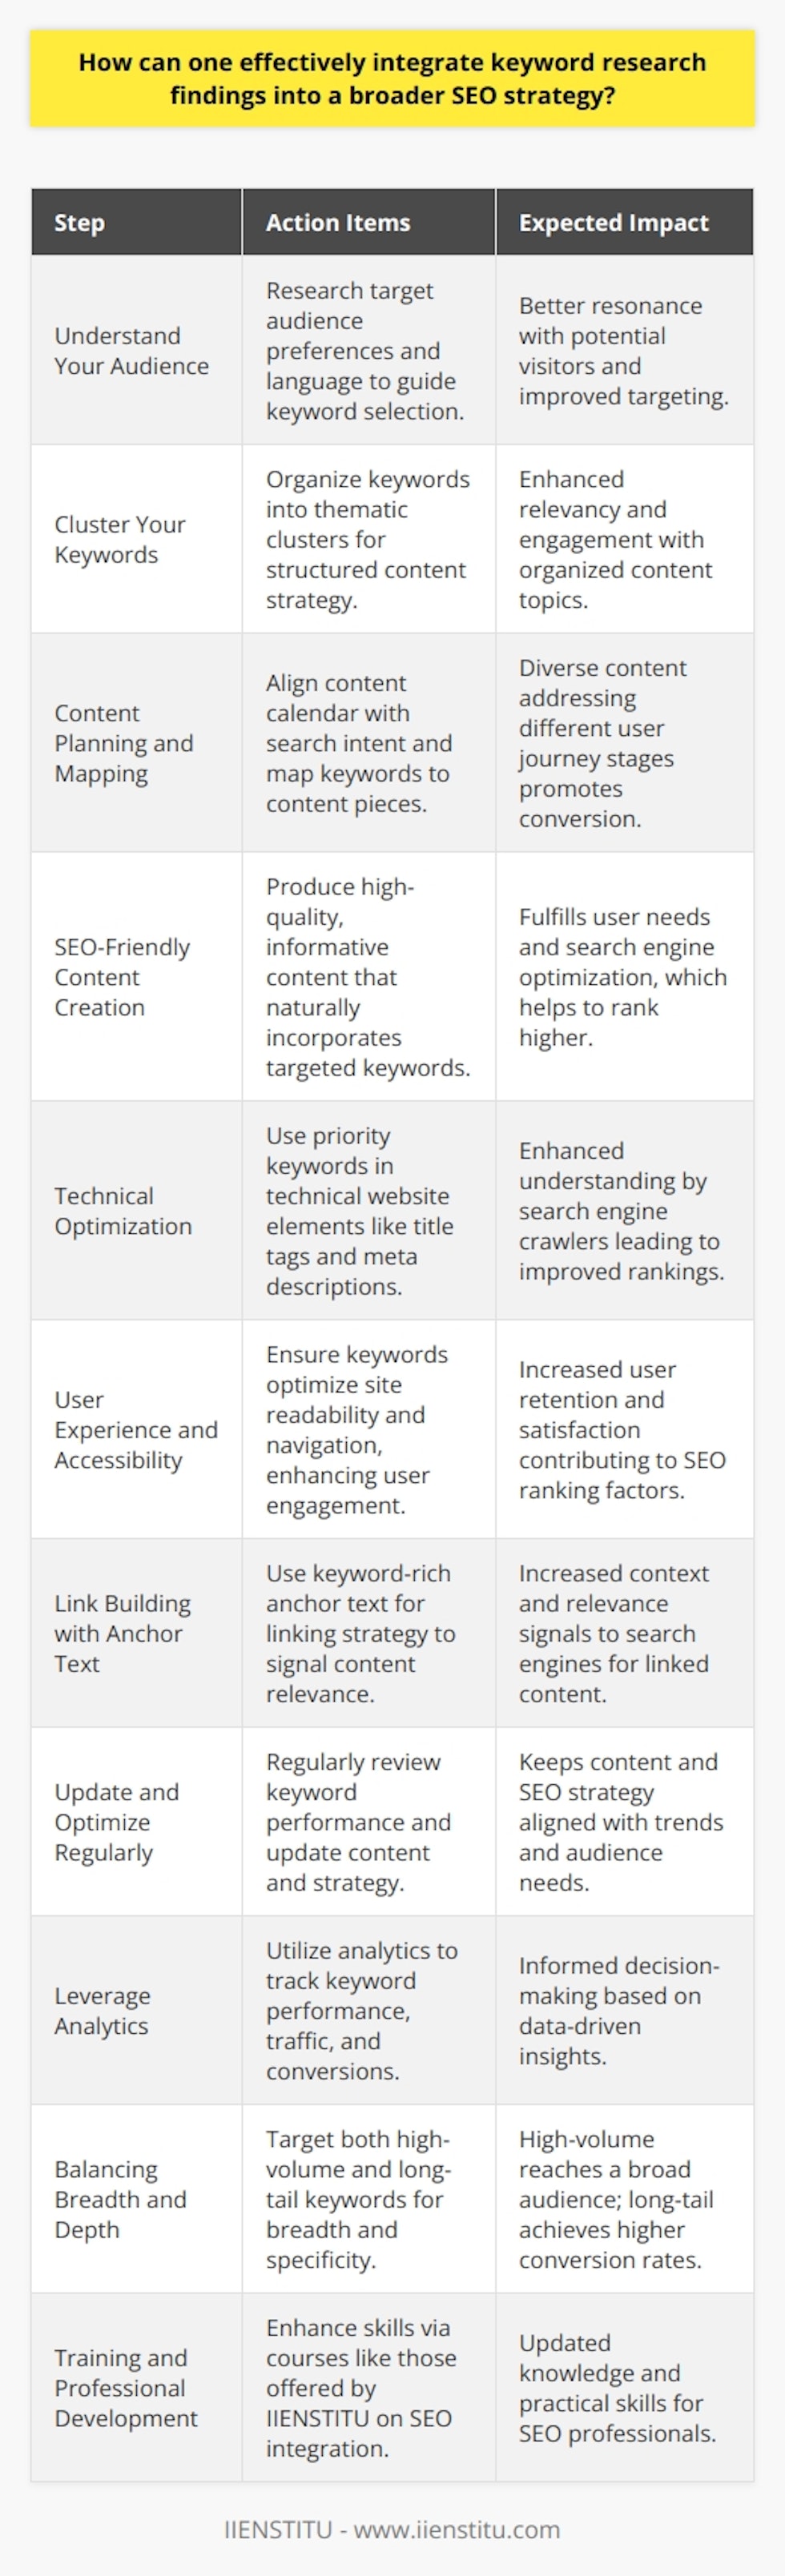 Keyword research is a pivotal component of SEO that essentially informs various strategic decisions. Weaving these findings into the fabric of an SEO strategy requires a systematic approach. Below are the key steps to effectively integrate keyword research into your SEO blueprint:1. **Understand Your Audience**: Before delving into keyword research, gain a deep understanding of your target audience, their behaviors, preferences, and the language they use. This will guide your keyword selection process, ensuring that you focus on terms that resonate with your potential visitors.2. **Cluster Your Keywords**: After identifying a comprehensive list of keywords through research, categorize them into thematic clusters. Such clustering allows you to organize your content strategy around topic areas, making it easier to create content that is relevant and engaging for your audience.3. **Content Planning and Mapping**: Leverage your keyword findings by crafting a content calendar that aligns with search intent. Map each keyword to a specific content piece, ensuring that you have a diverse mix of content types to address different stages of the user's journey – from awareness to consideration to decision.4. **SEO-Friendly Content Creation**: When producing content, strategically integrate your targeted keywords without compromising the natural flow and quality. Focus on delivering value to your audience. High-quality, informative content that naturally incorporates keywords will satisfy both users and search engines.5. **Technical Optimization**: Implement your priority keywords in the technical elements of your website. This includes title tags, meta descriptions, URL slugs, and ALT tags for images. The technical use of keywords helps search engine crawlers better understand and rank your content.6. **User Experience and Accessibility**: Google’s algorithms now prioritize user experience. Ensure that your use of keywords is not just for ranking purposes but also enhances the readability and navigation of your site, thereby improving user engagement and retention.7. **Link Building with Anchor Text**: As you distribute content across the web or within your own site, use keyword-rich anchor text for internal and external links where appropriate. This signals to search engines the relevance and context of your linked content.8. **Update and Optimize Regularly**: Digital markets are dynamic; therefore, your keyword focus might shift with trends and audience needs. Review your keyword performance, update your content, and refresh your SEO strategy to keep pace with these changes.9. **Leverage Analytics**: Monitor the performance of your keywords by utilizing analytics tools to track rankings, traffic, and conversions. This data will inform your decisions, allowing you to double down on what works and pivot from less effective strategies.10. **Balancing Breadth and Depth**: While targeting high-volume keywords is crucial, do not ignore the long-tail keywords that often convert better due to their specificity. They can provide a competitive edge and reach a more targeted audience ready for conversion.11. **Training and Professional Development**: For those looking to enhance their skills in integrating keyword research into SEO strategies, educational platforms like IIENSTITU offer courses tailored to SEO professionals. These courses can provide updated knowledge and practical skills relevant to the industry.In essence, integrating keyword research findings into a broader SEO strategy is about creating a synergy between data-driven insights and creative content development. It demands a balance between satisfying the algorithms and providing an exemplary user experience. Implementing the steps described ensures that your SEO efforts remain holistic and customer-centric.